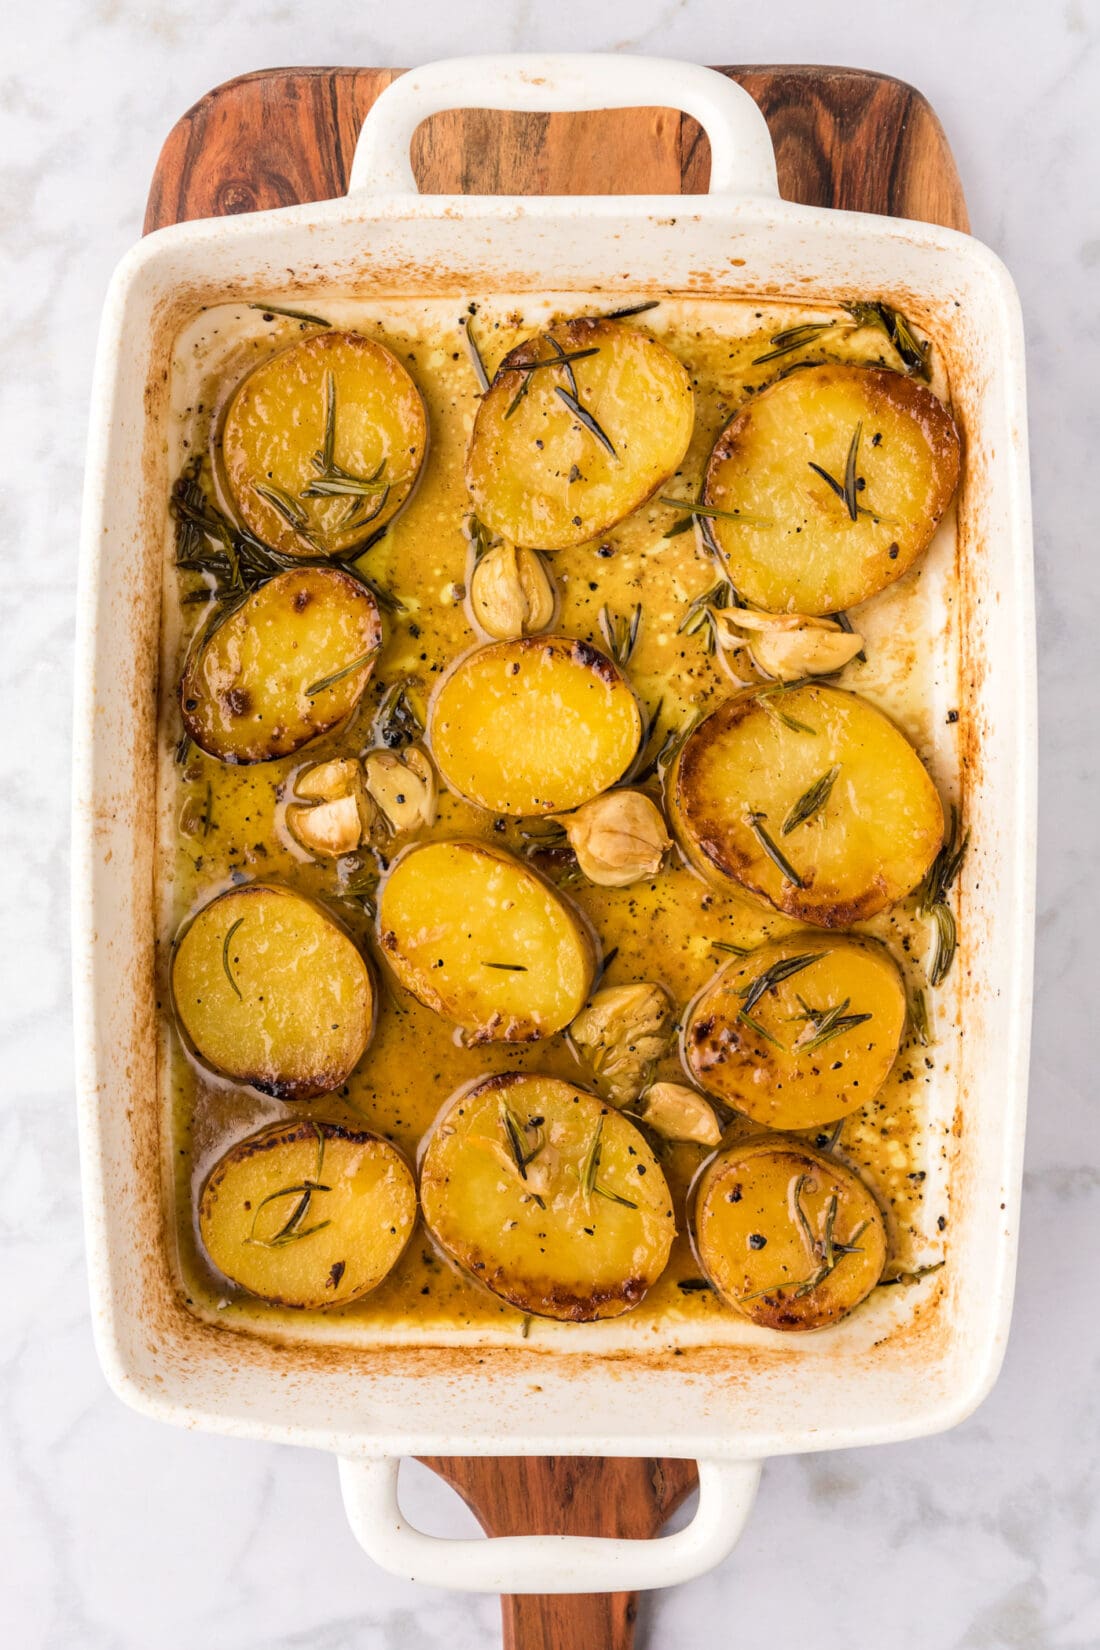 Baking dish of Melting Potatoes resting on a wooden platter